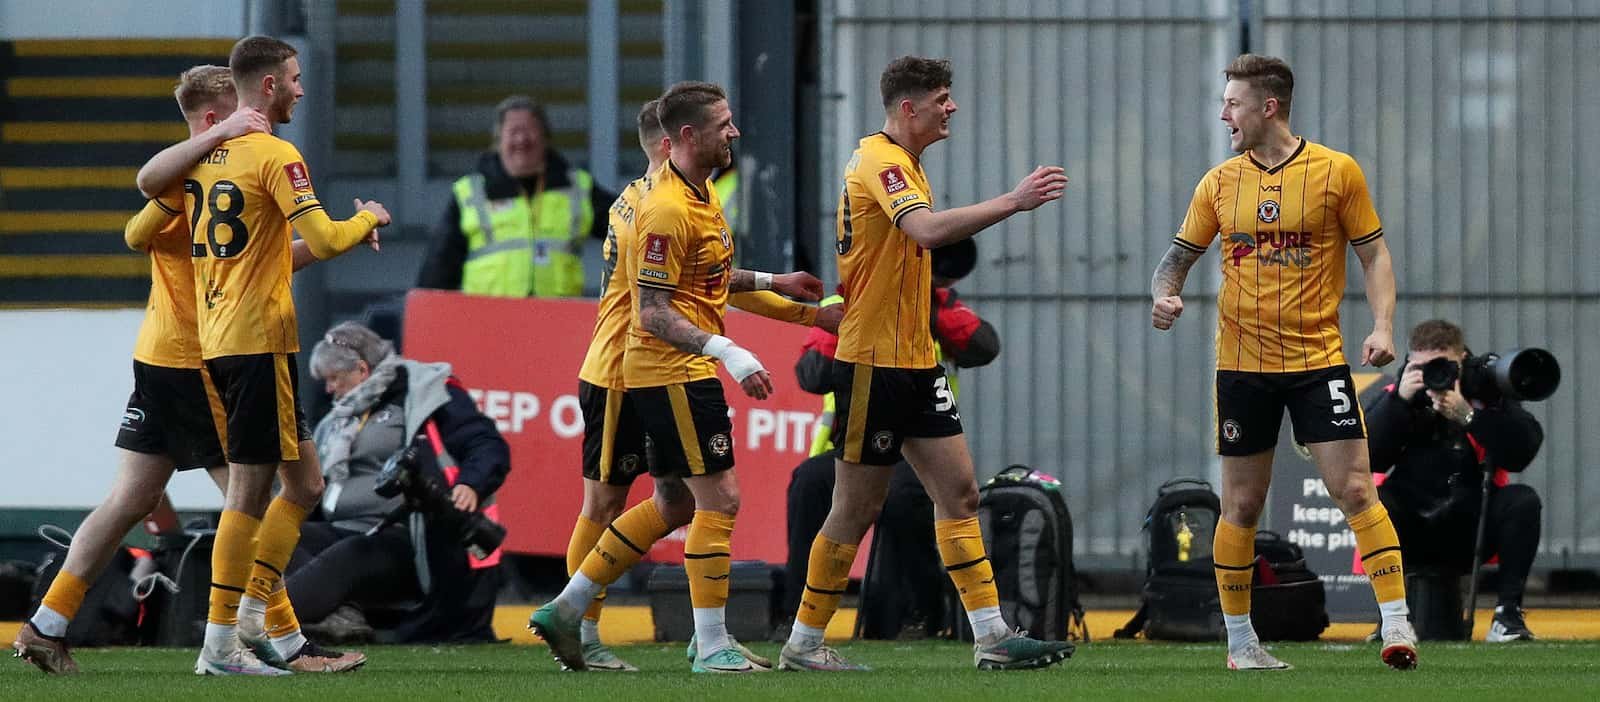 Newport County boss warns Man United to expect a “unique and hostile” atmosphere at Rodney Parade – Man United News And Transfer News